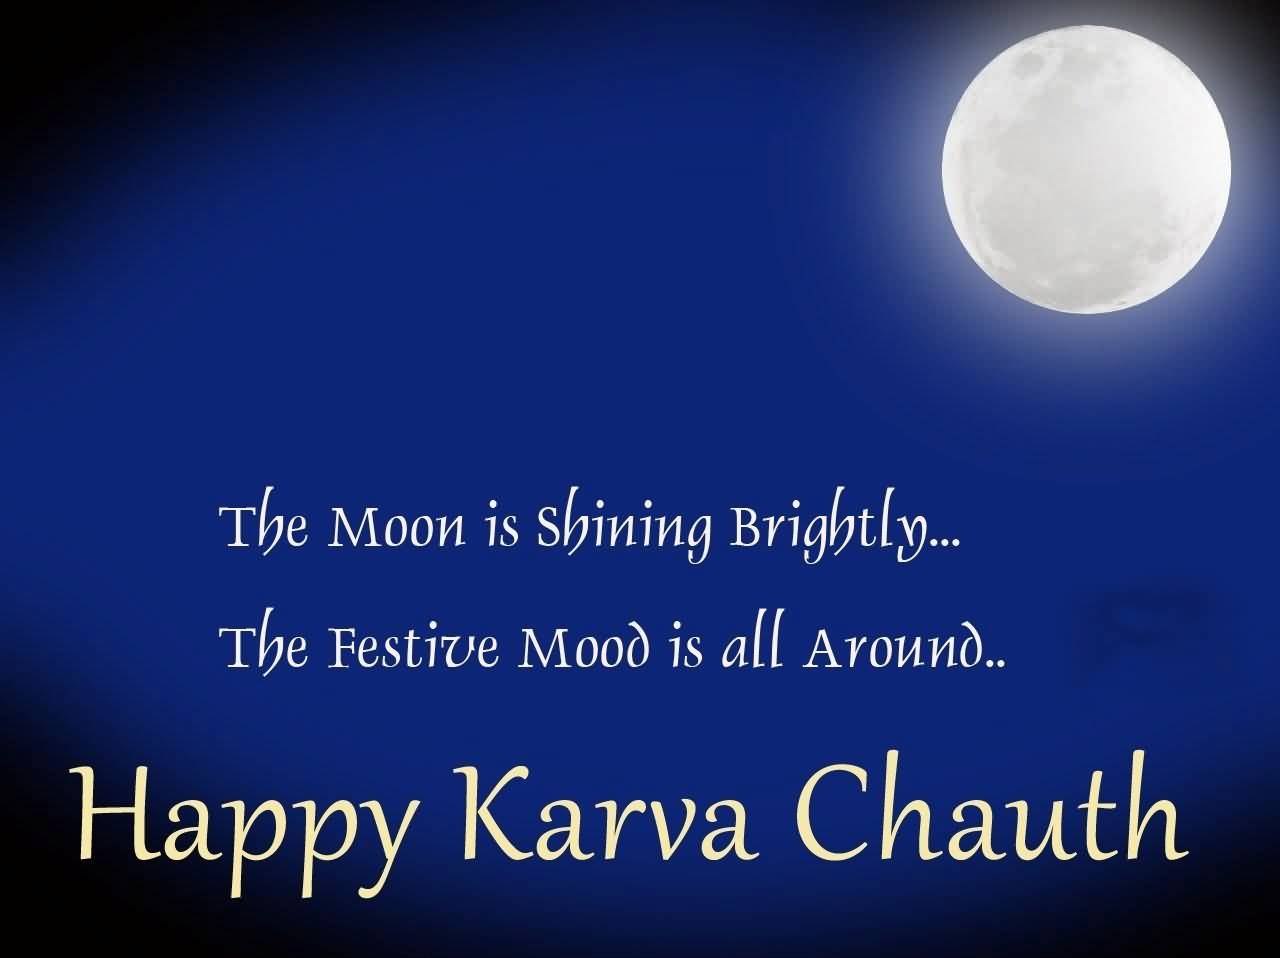 The Moon Is Shining Brightly The Festive Mood Is All Around Happy Karva Chauth Full Moon Picture